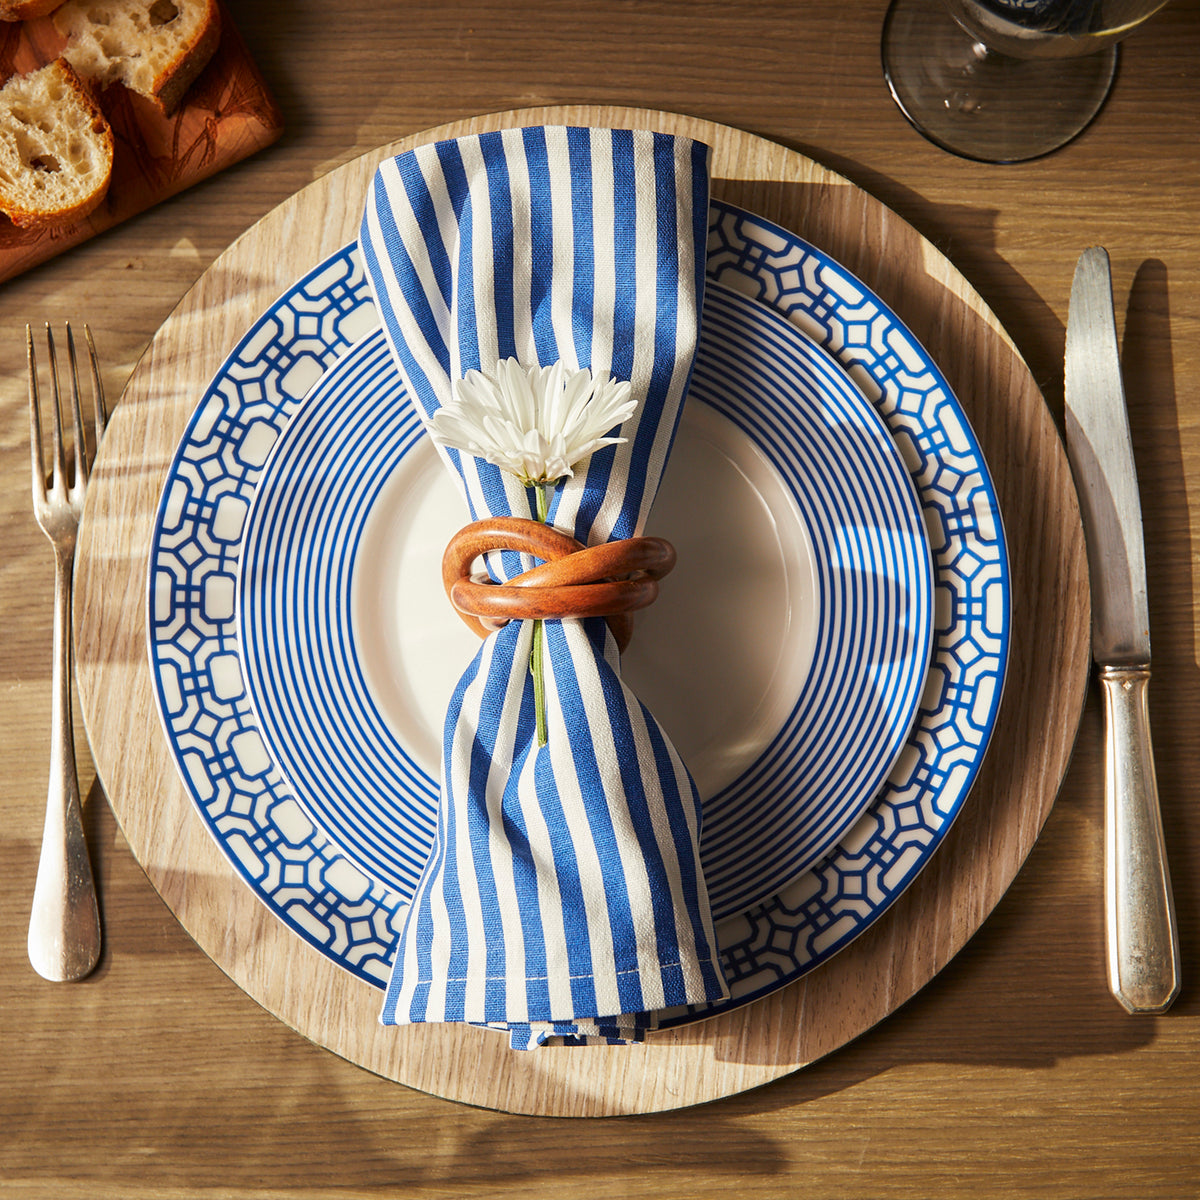 A place setting with a porcelain Newport Garden Gate Rimmed Dinner Plate by Caskata Artisanal Home featuring a blue and white pattern, striped napkin with a white flower, utensils, and a wooden placemat. Bread slices are in the top left corner, adding to the coastal collection ambiance.